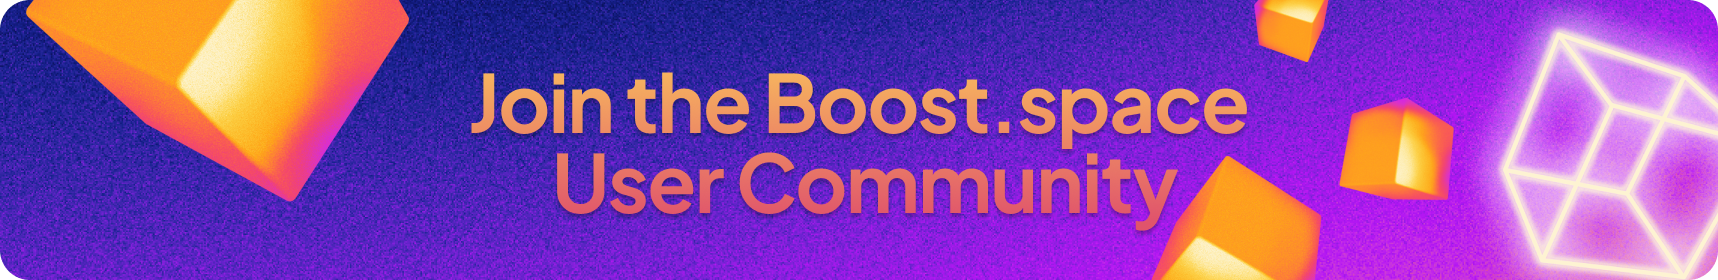 join user community, boost.space, facebook